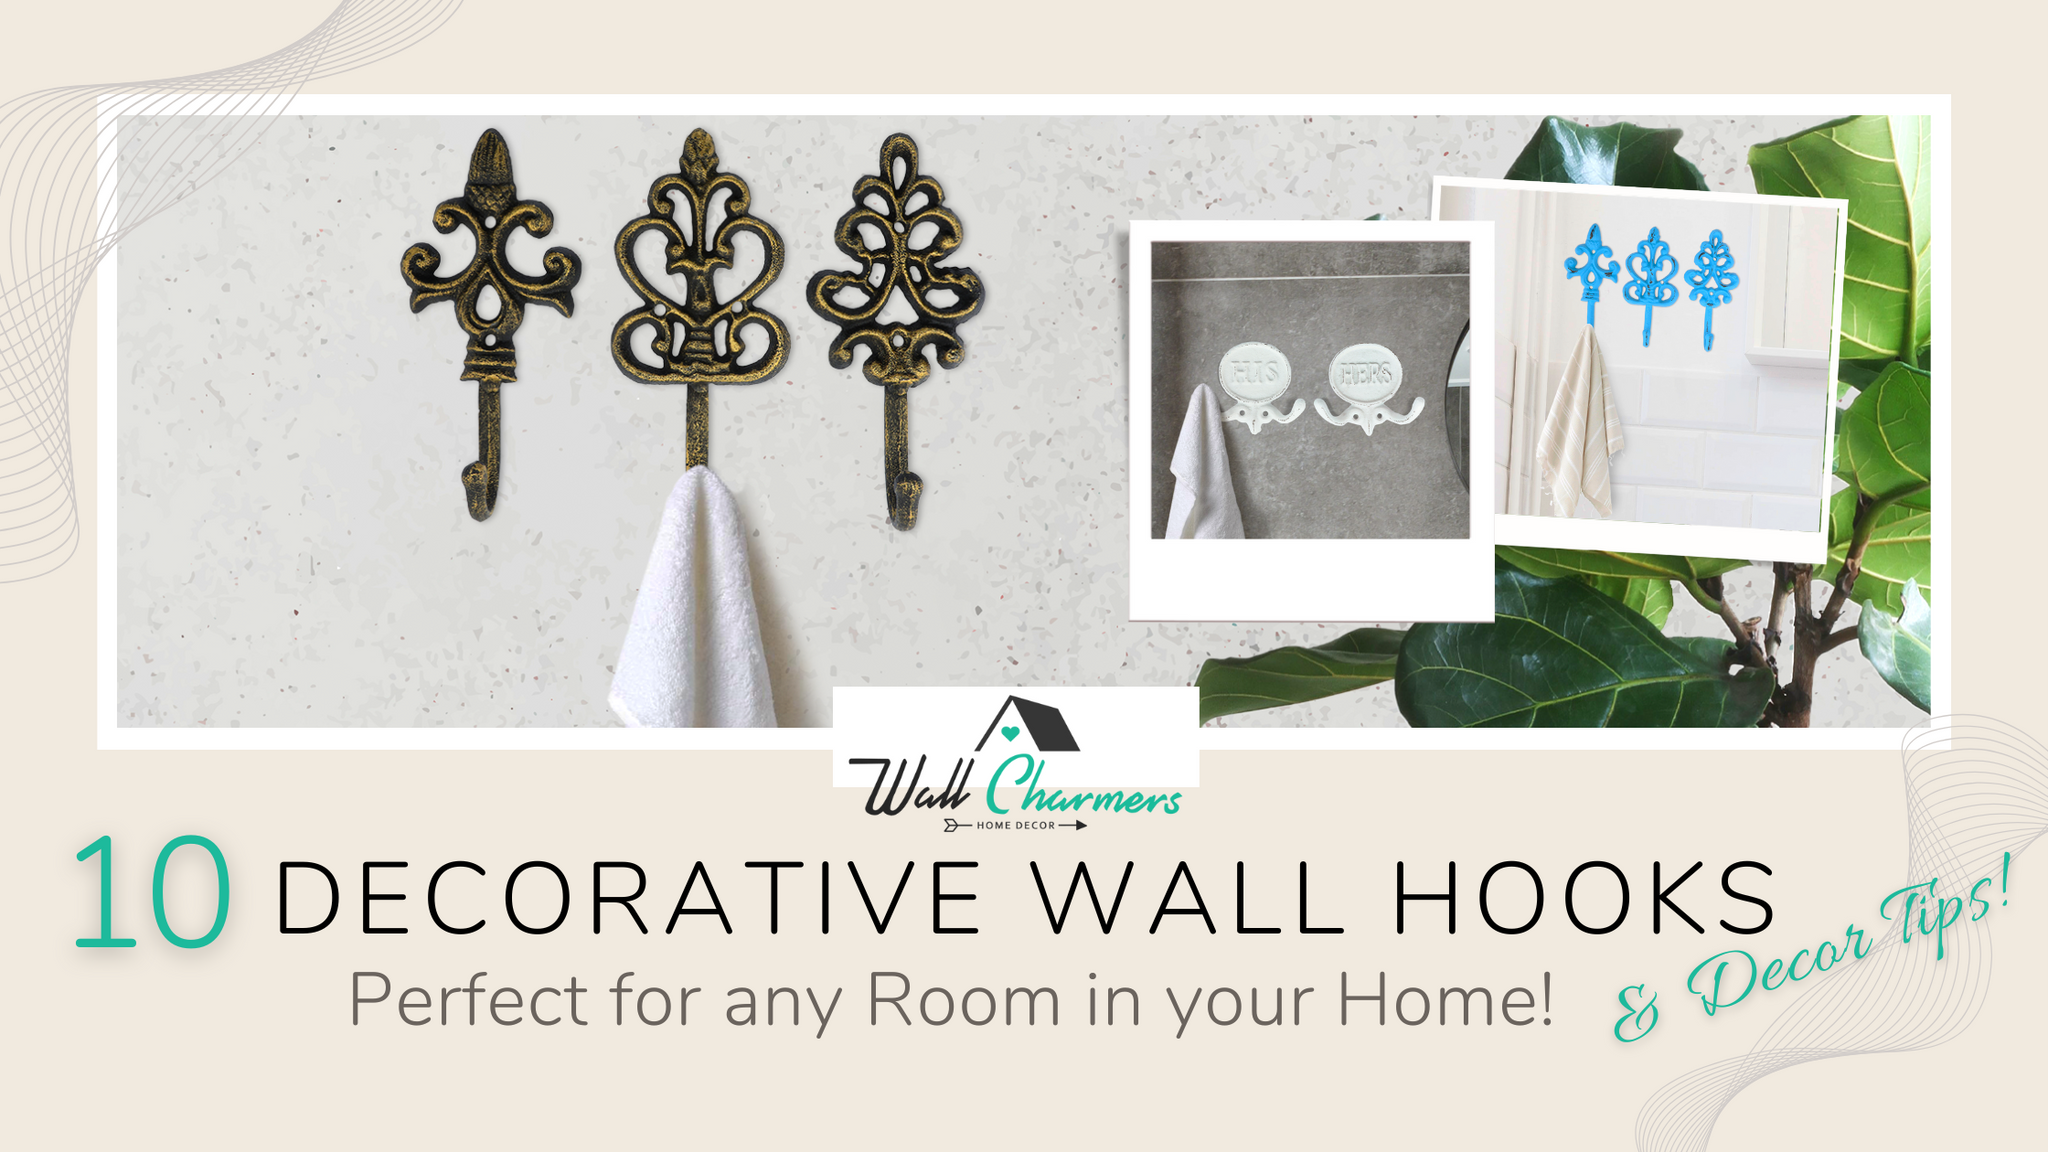 10 Decorative Wall Hooks with Tips to enhance your Home!